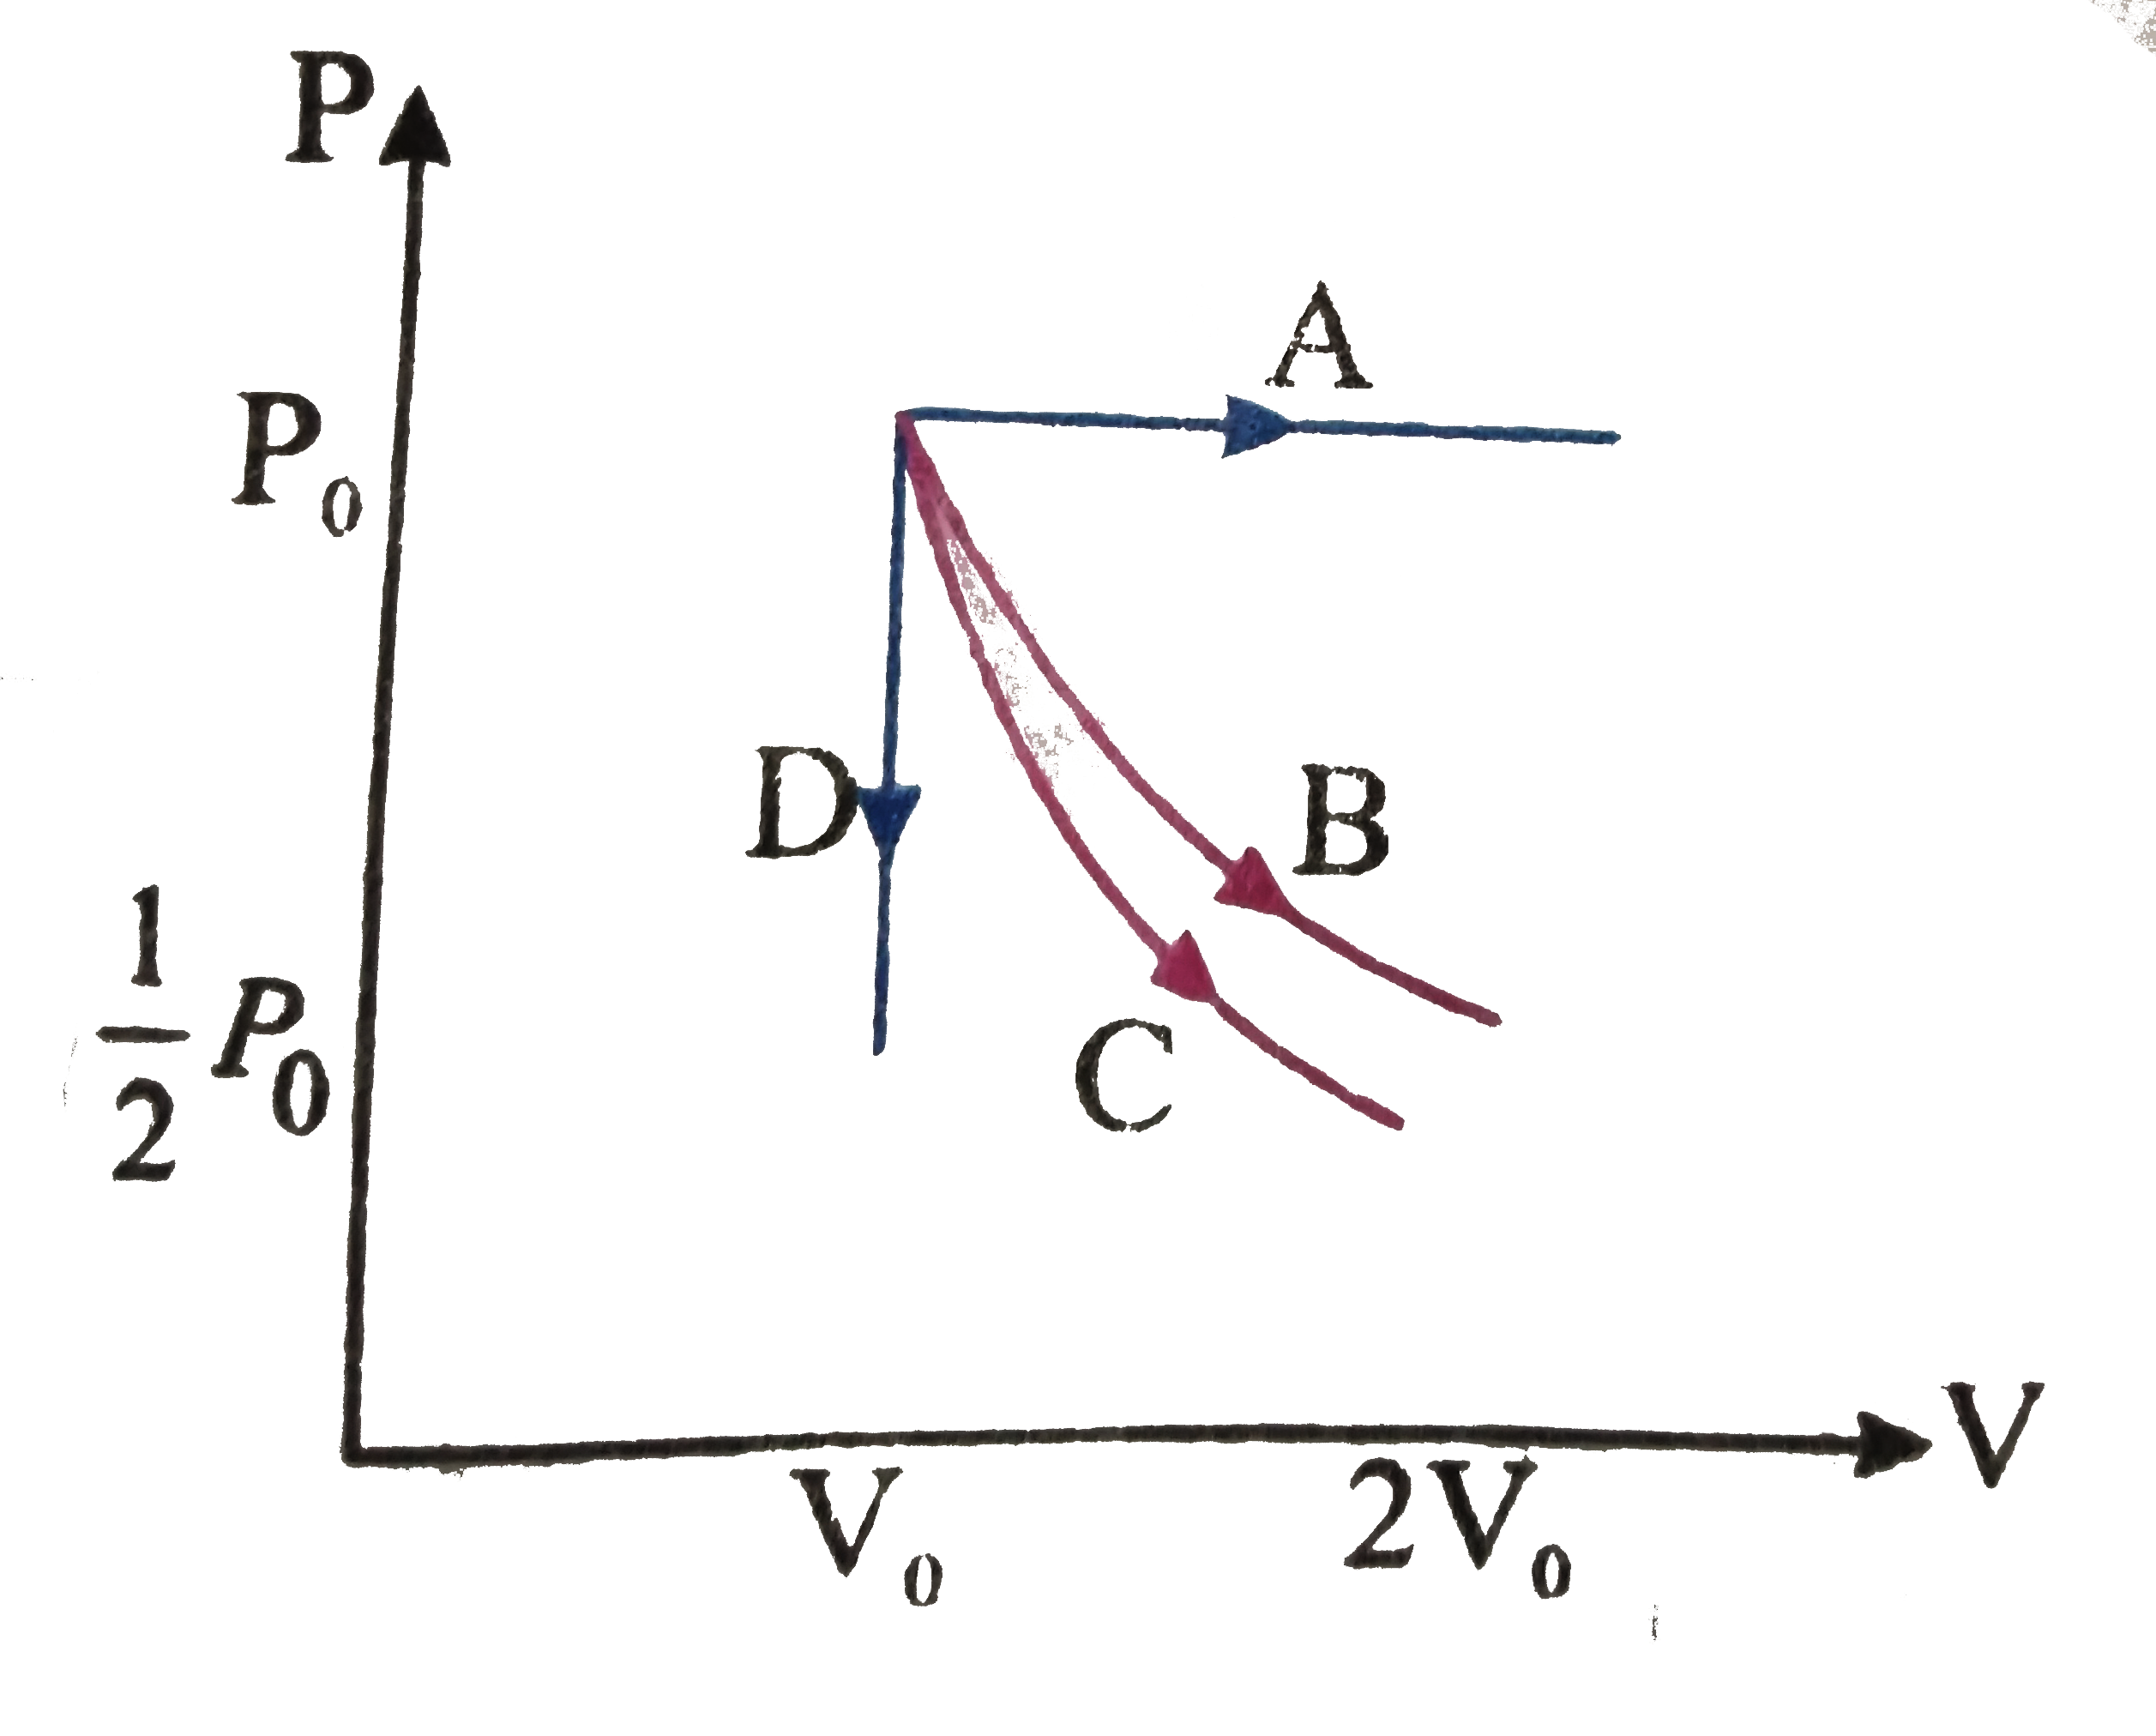 The PV diagram shows four different possible paths of a reversible processes performed on a monoatomic ideal gas. Path A is isobaric, path B is isothermal, path C is adiabatic and path D is isochoric. For which process does the temperature of the gas decrease?